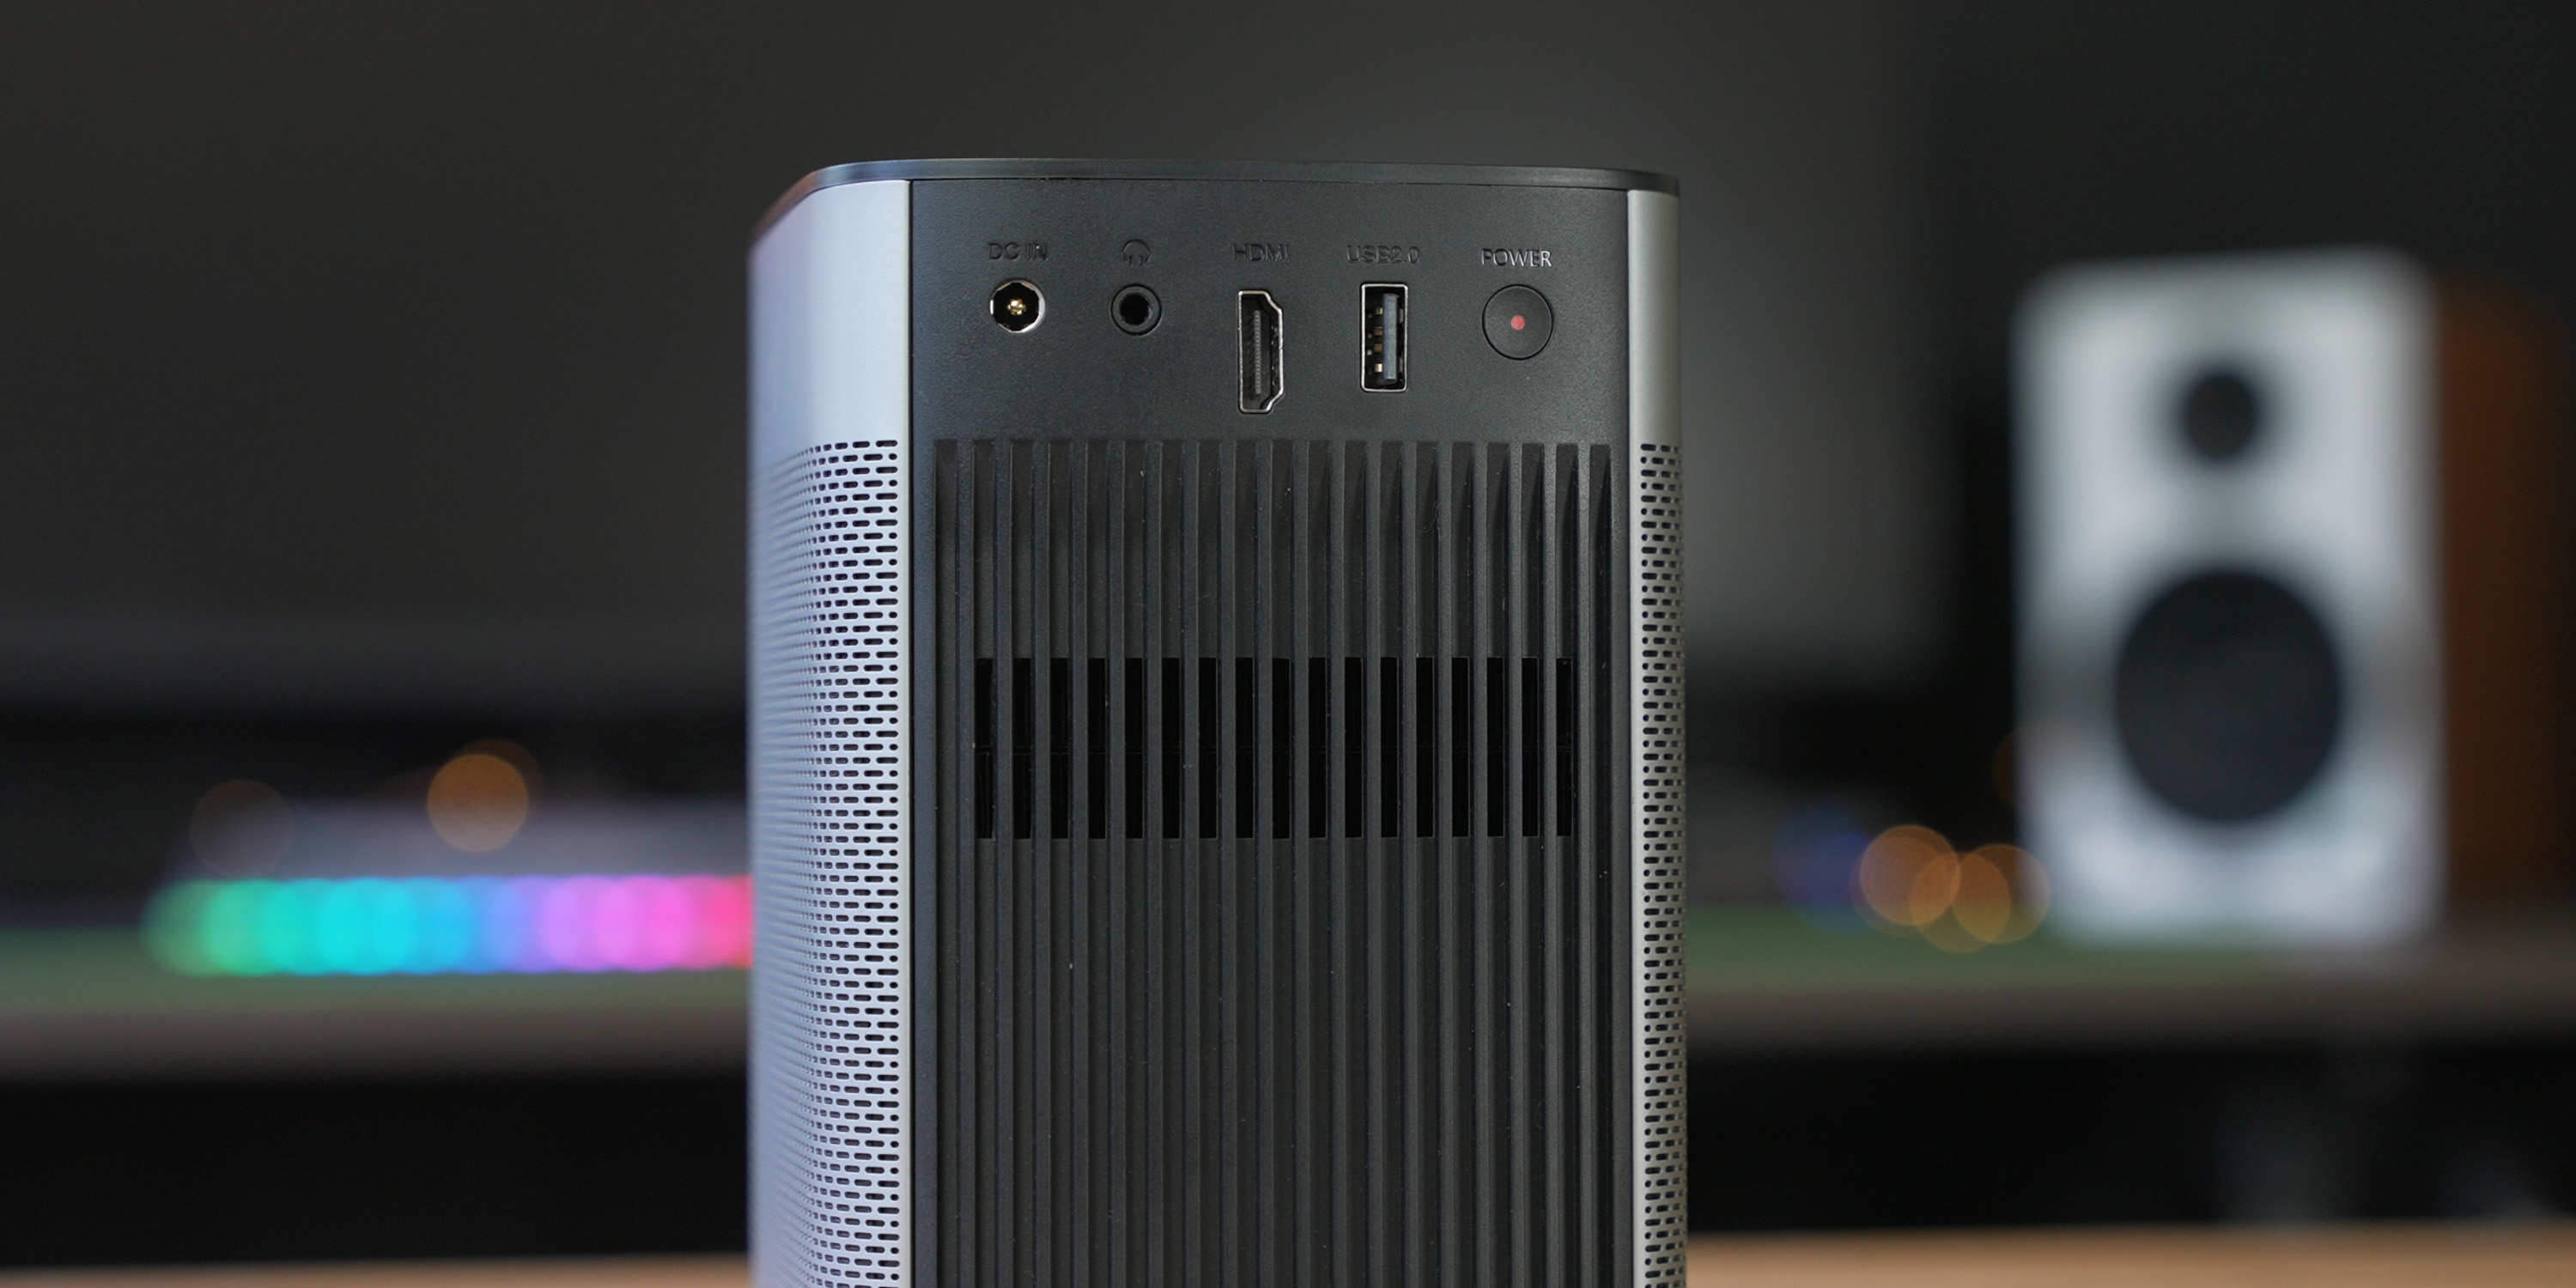 XGIMI Halo review: My new favorite portable projector